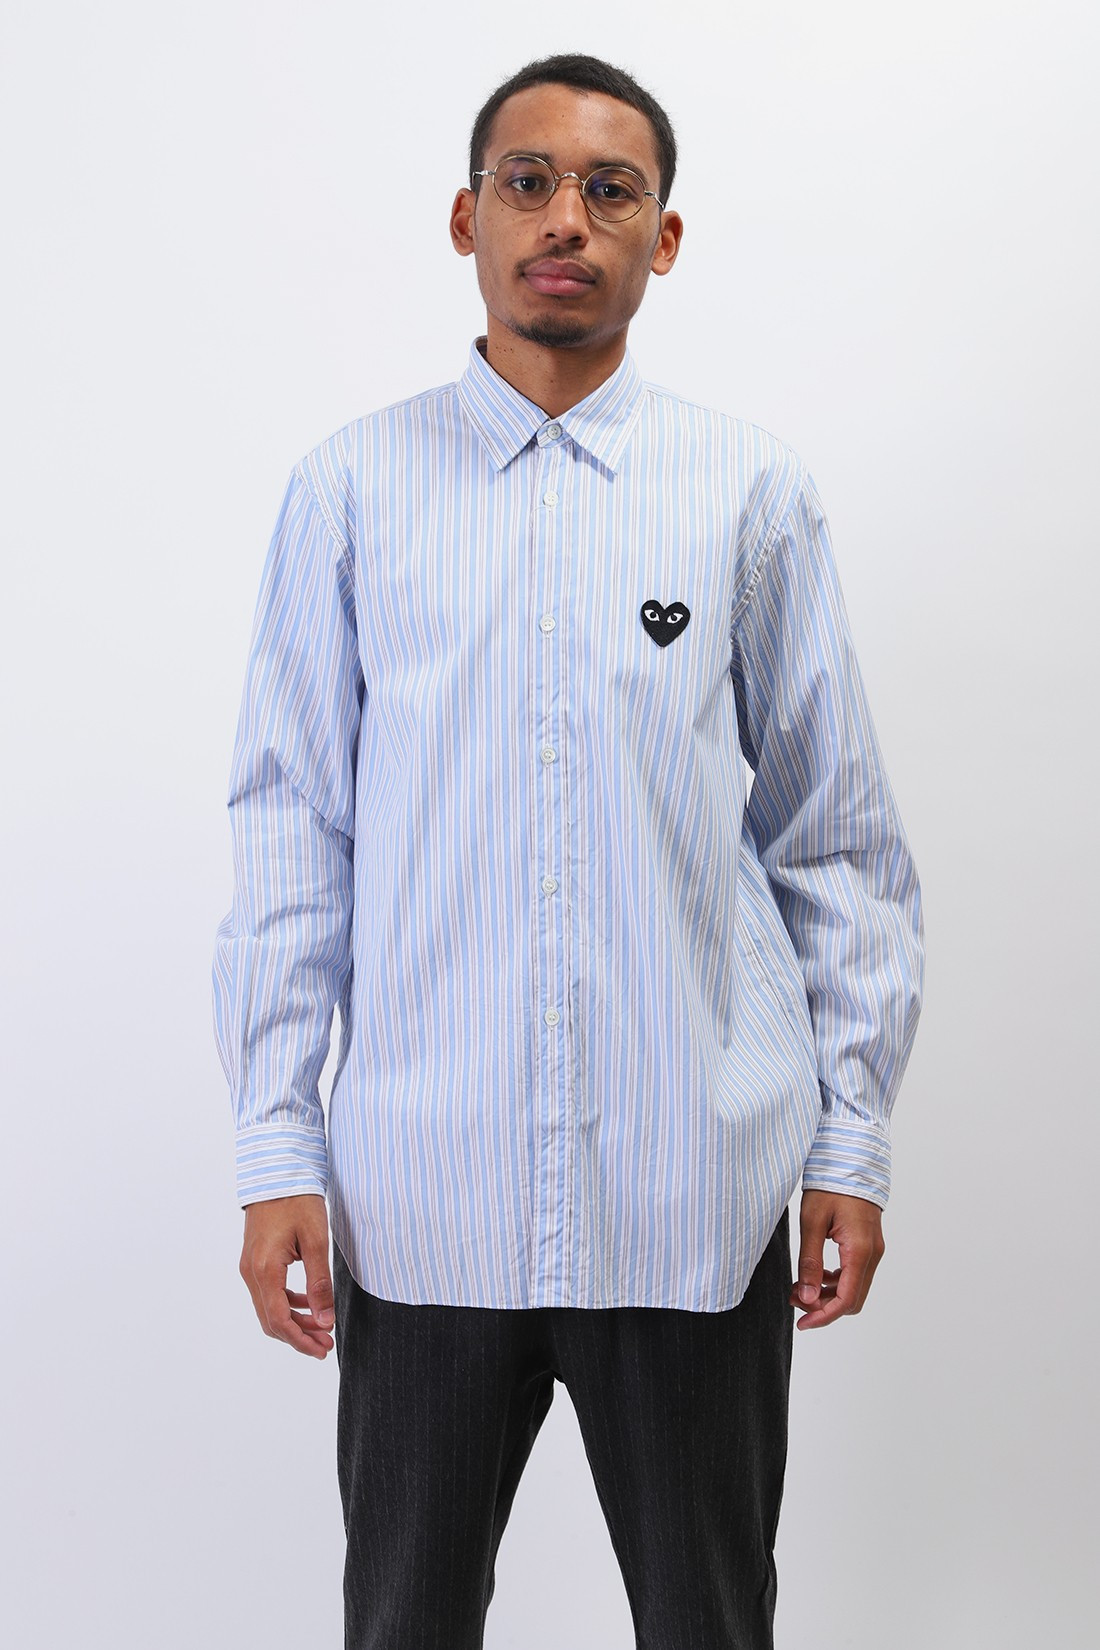 comme des garcons play striped shirt